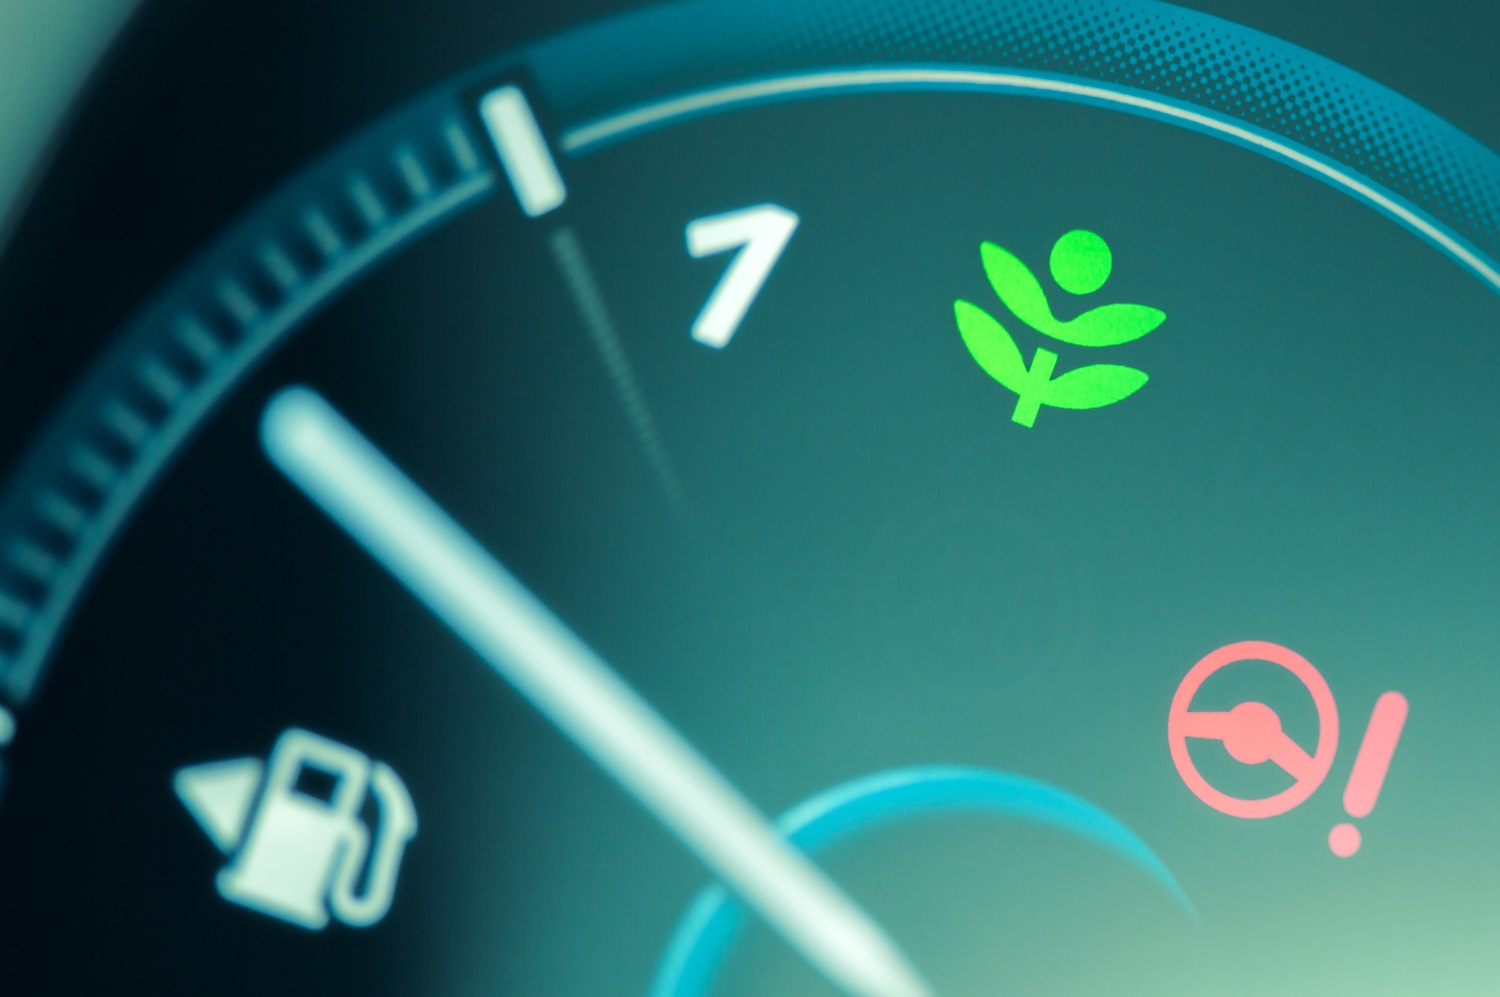 Eco drive light icon on car dashboard. Eco-driving concept